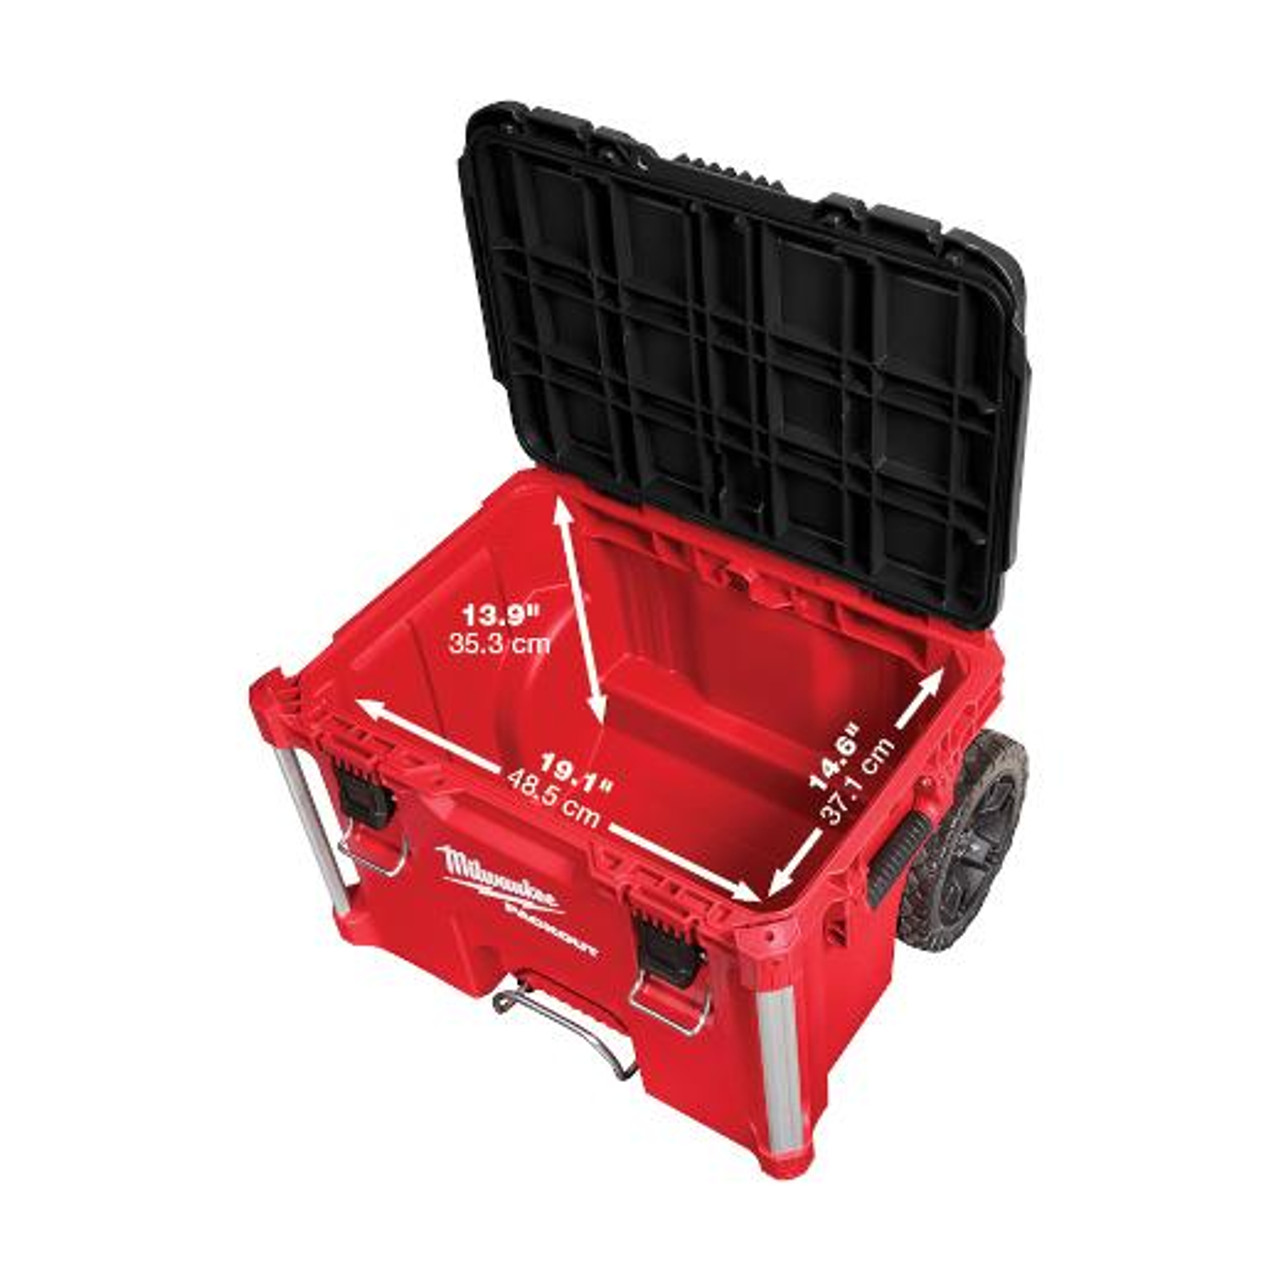  Milwaukee PACKOUT Rolling Tool Box 48-22-8426 